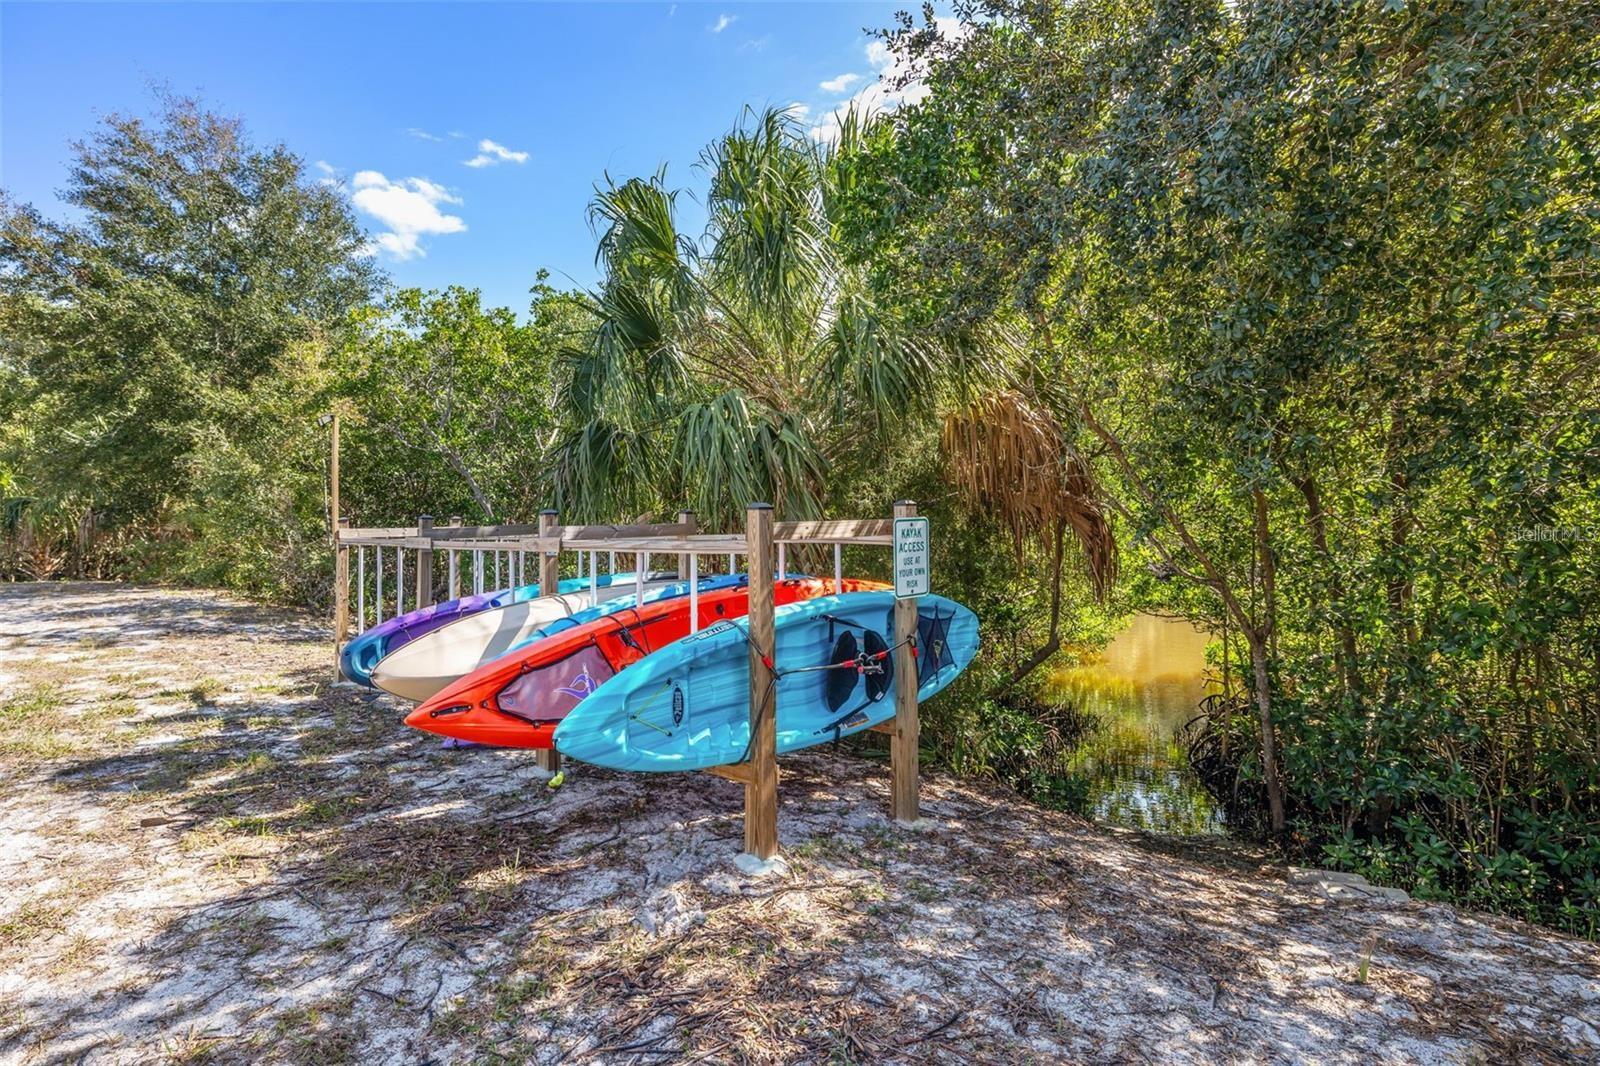 Kayak storage and launch area for owners.